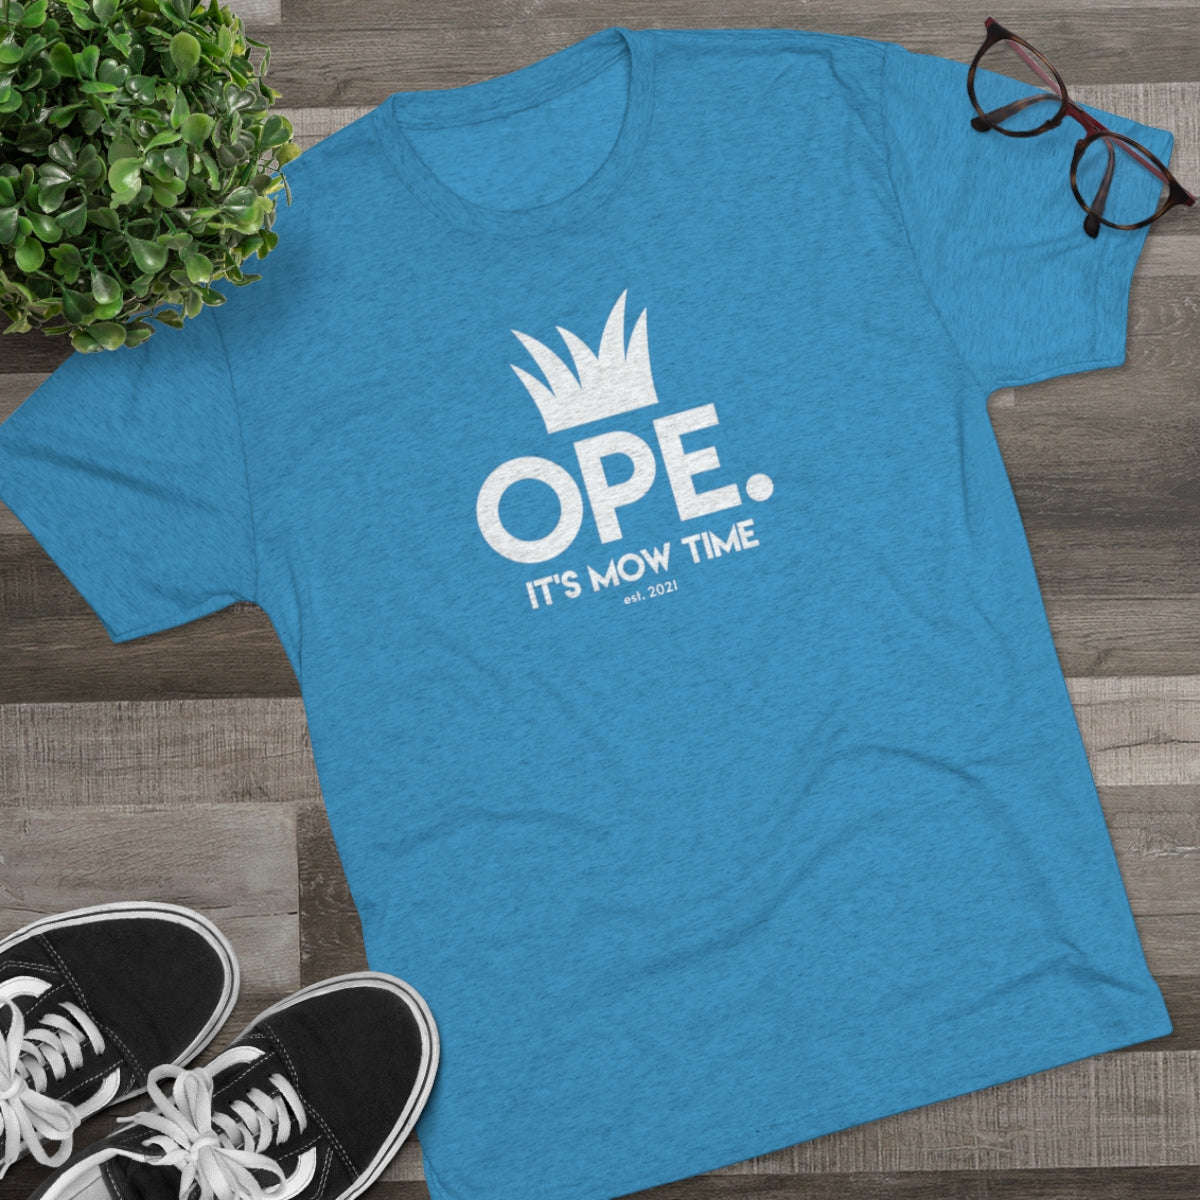 Ope It's Mow Time Tee